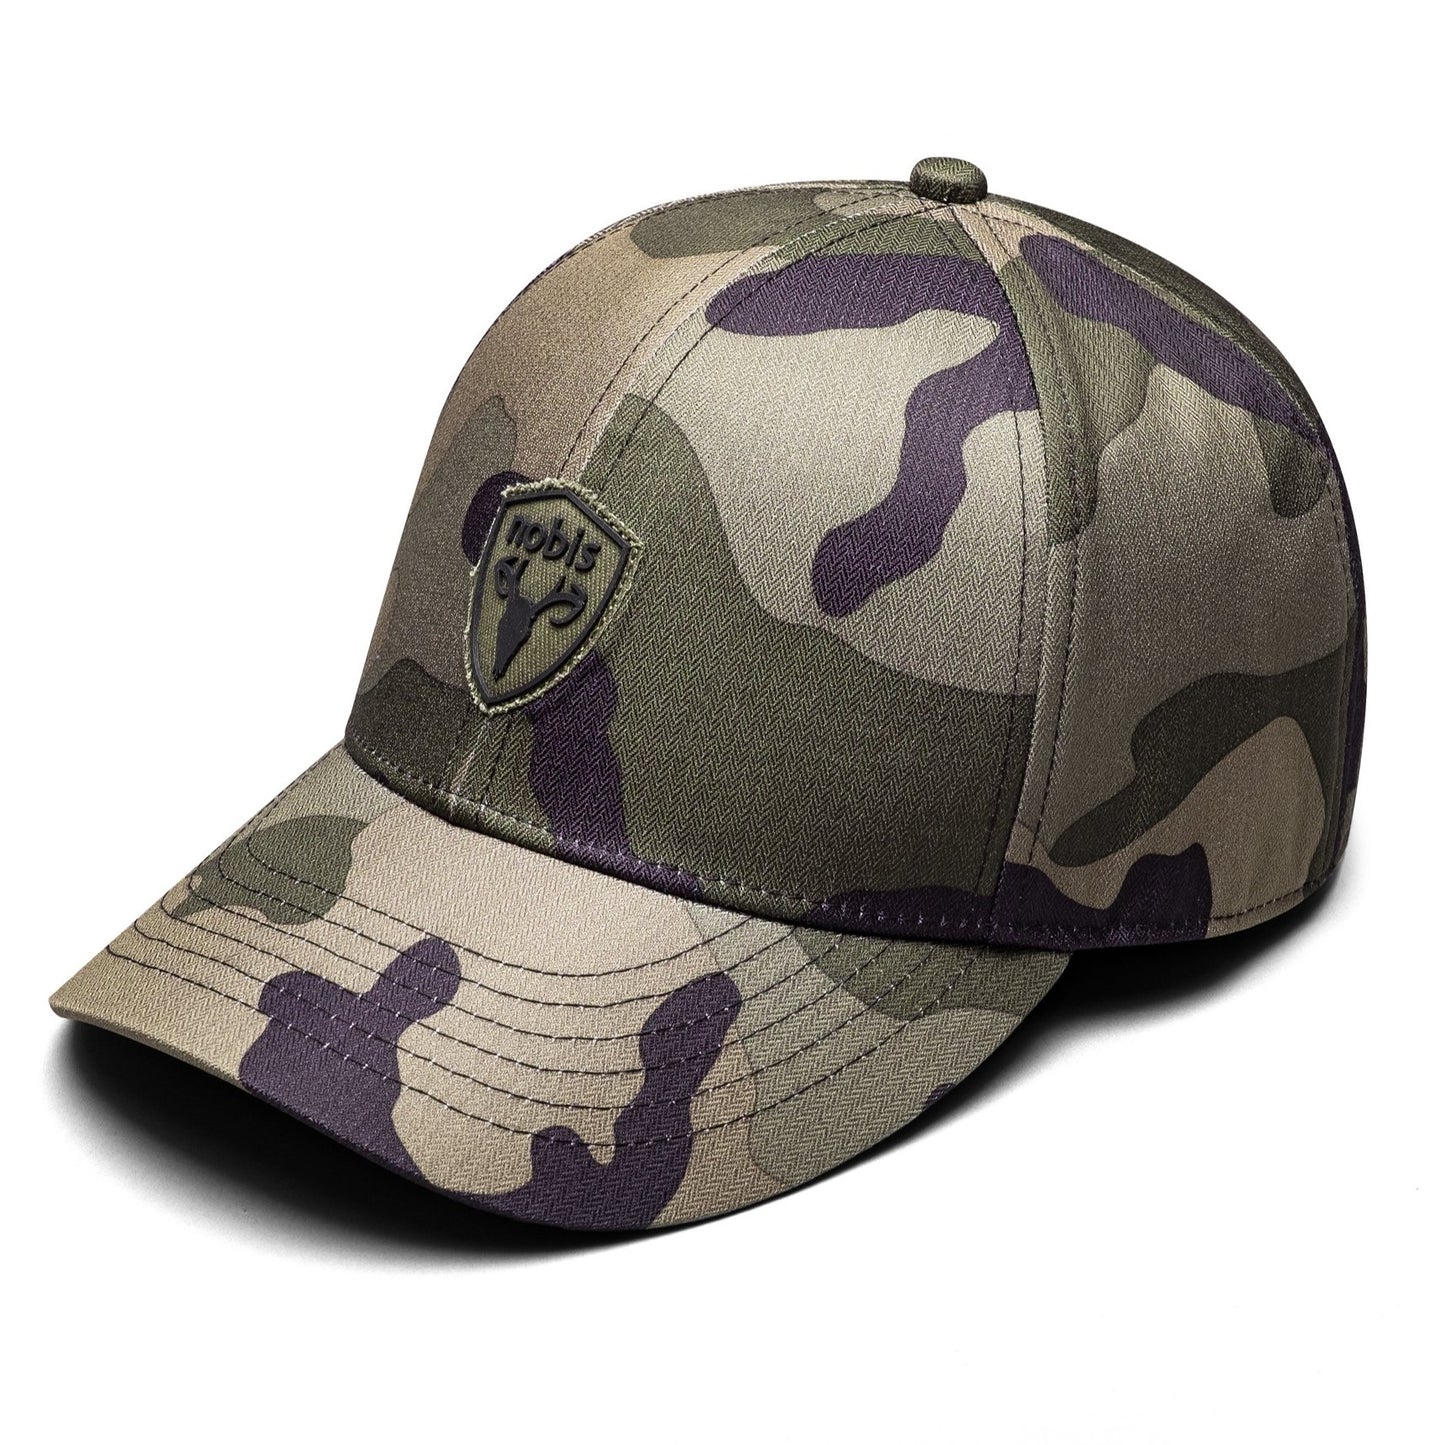 Classic ball cap with the Nobis crest on the front panel in Camo